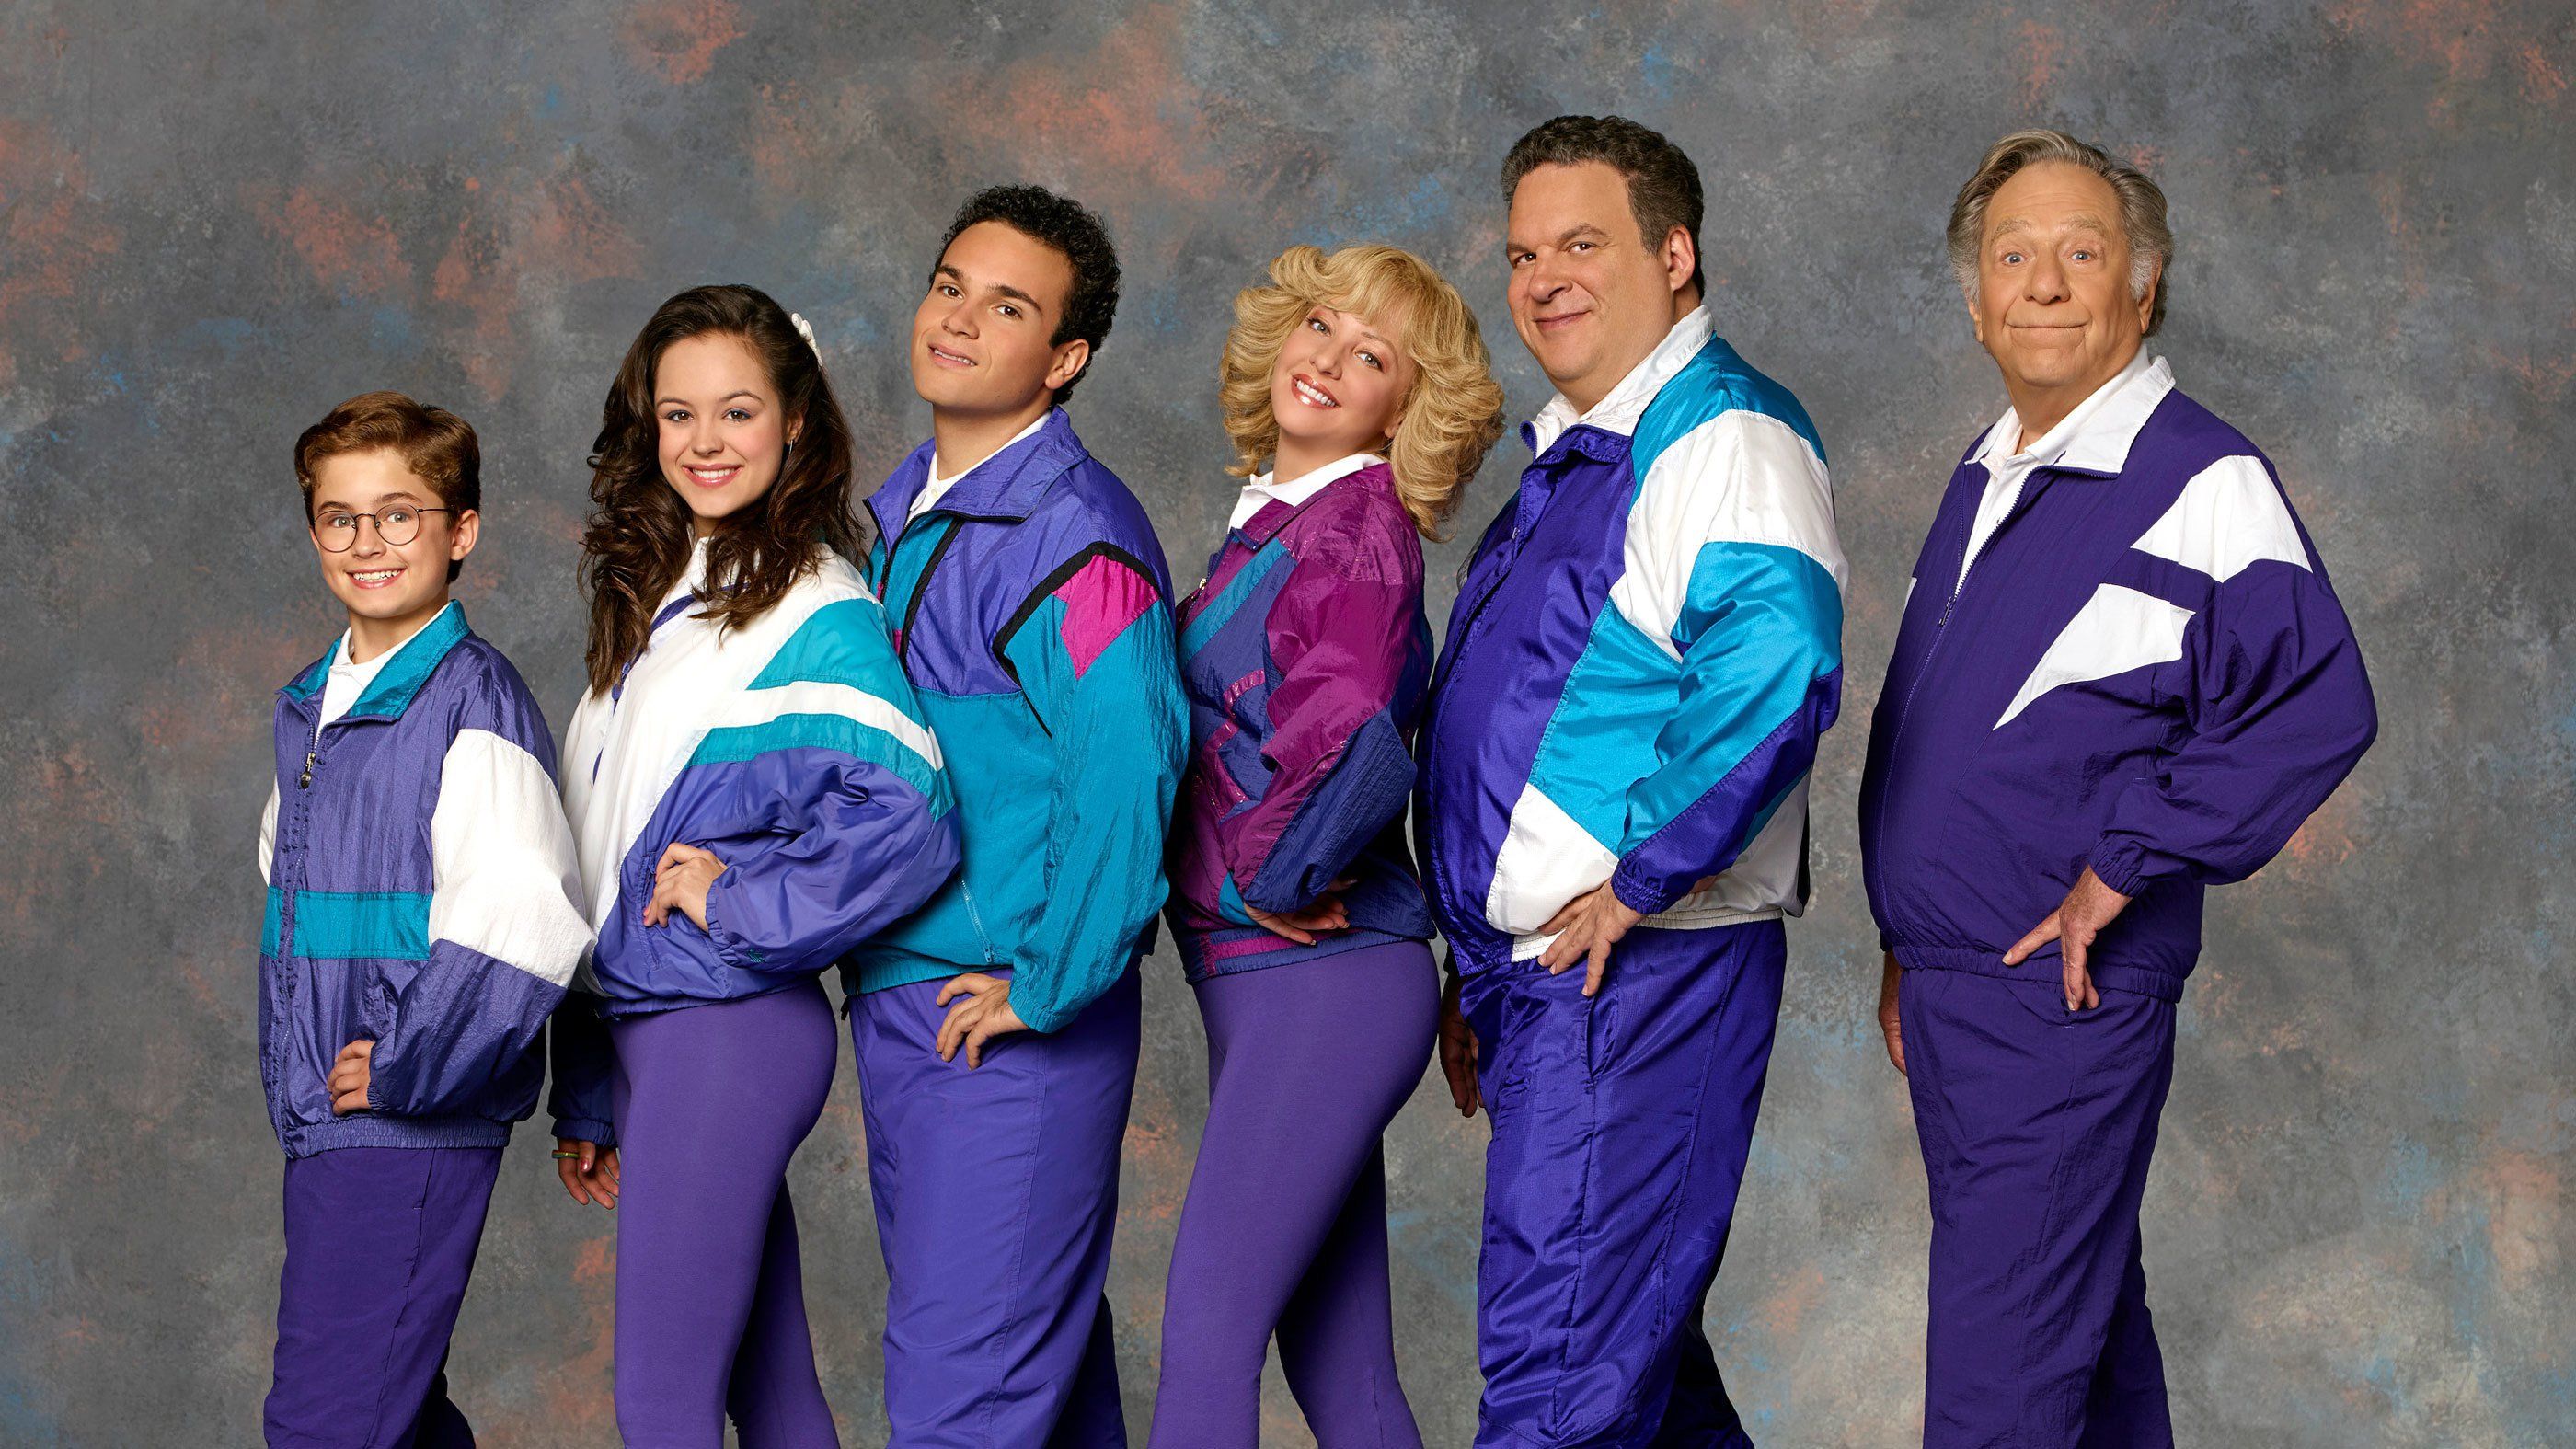 The Goldbergs cast awkward family portrait in track suits